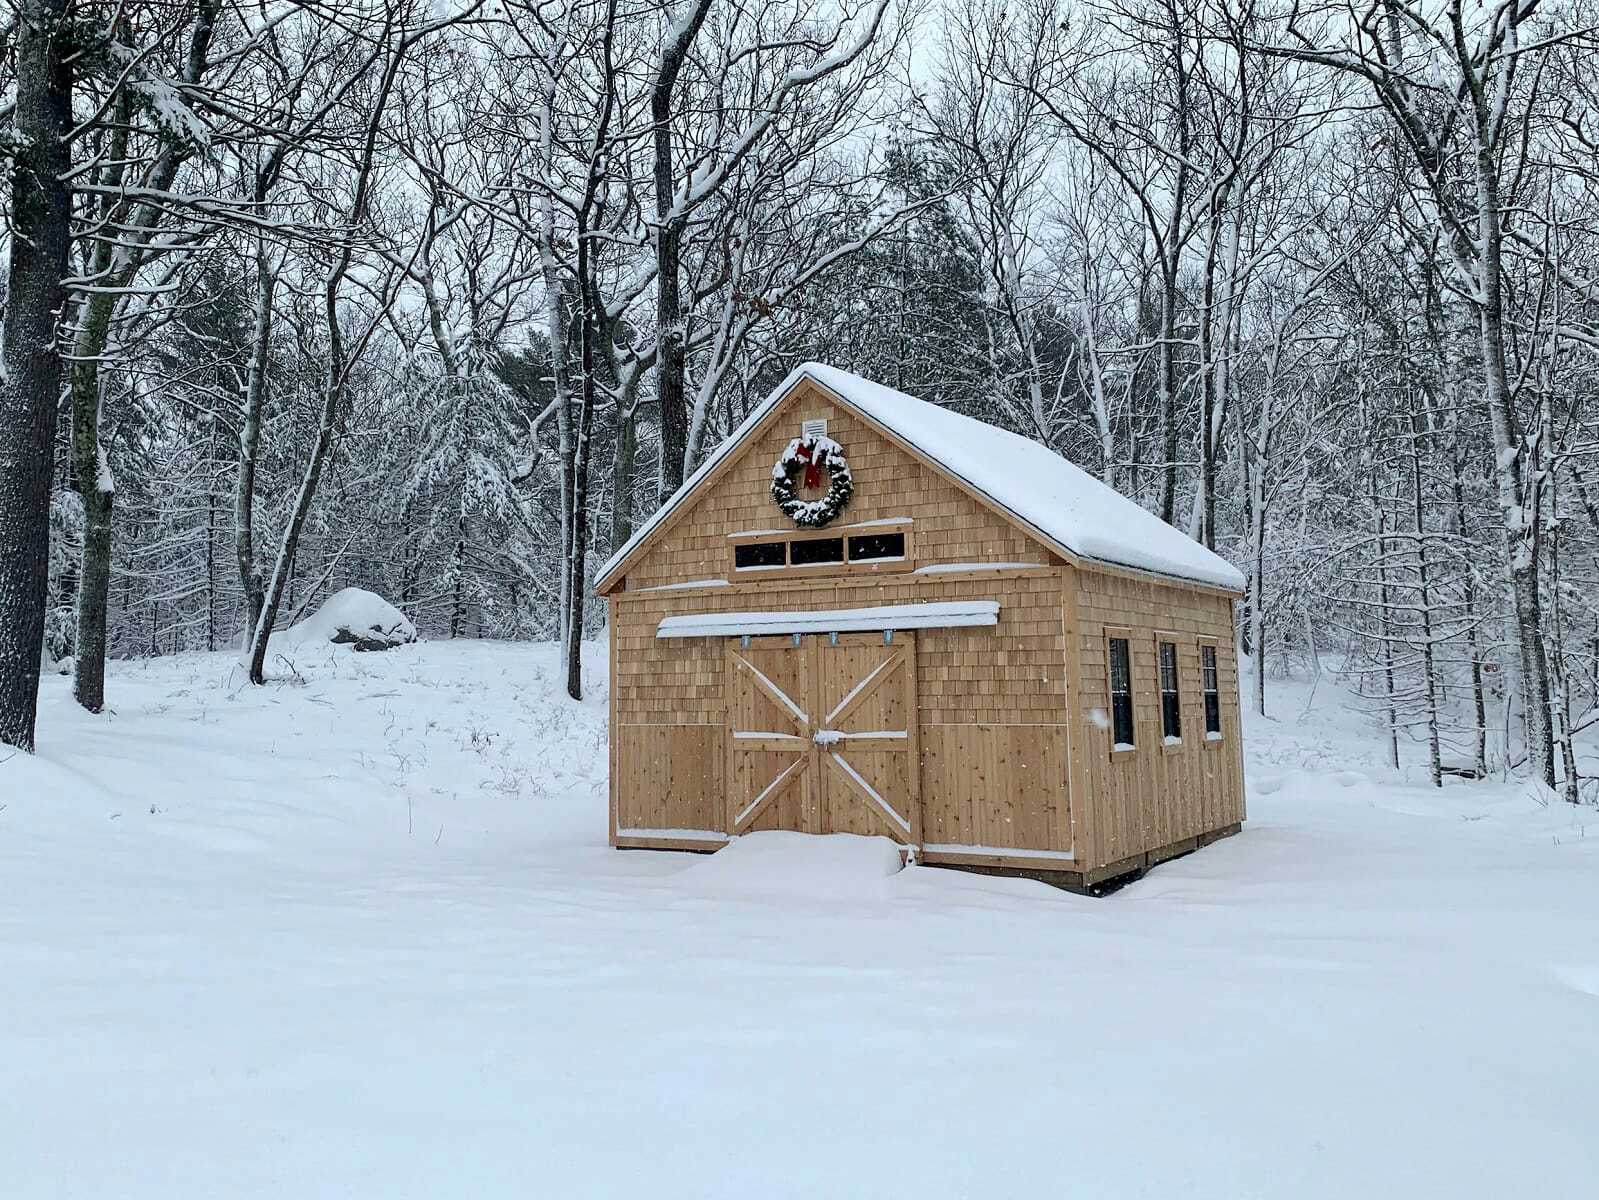 How to Winterize a Shed